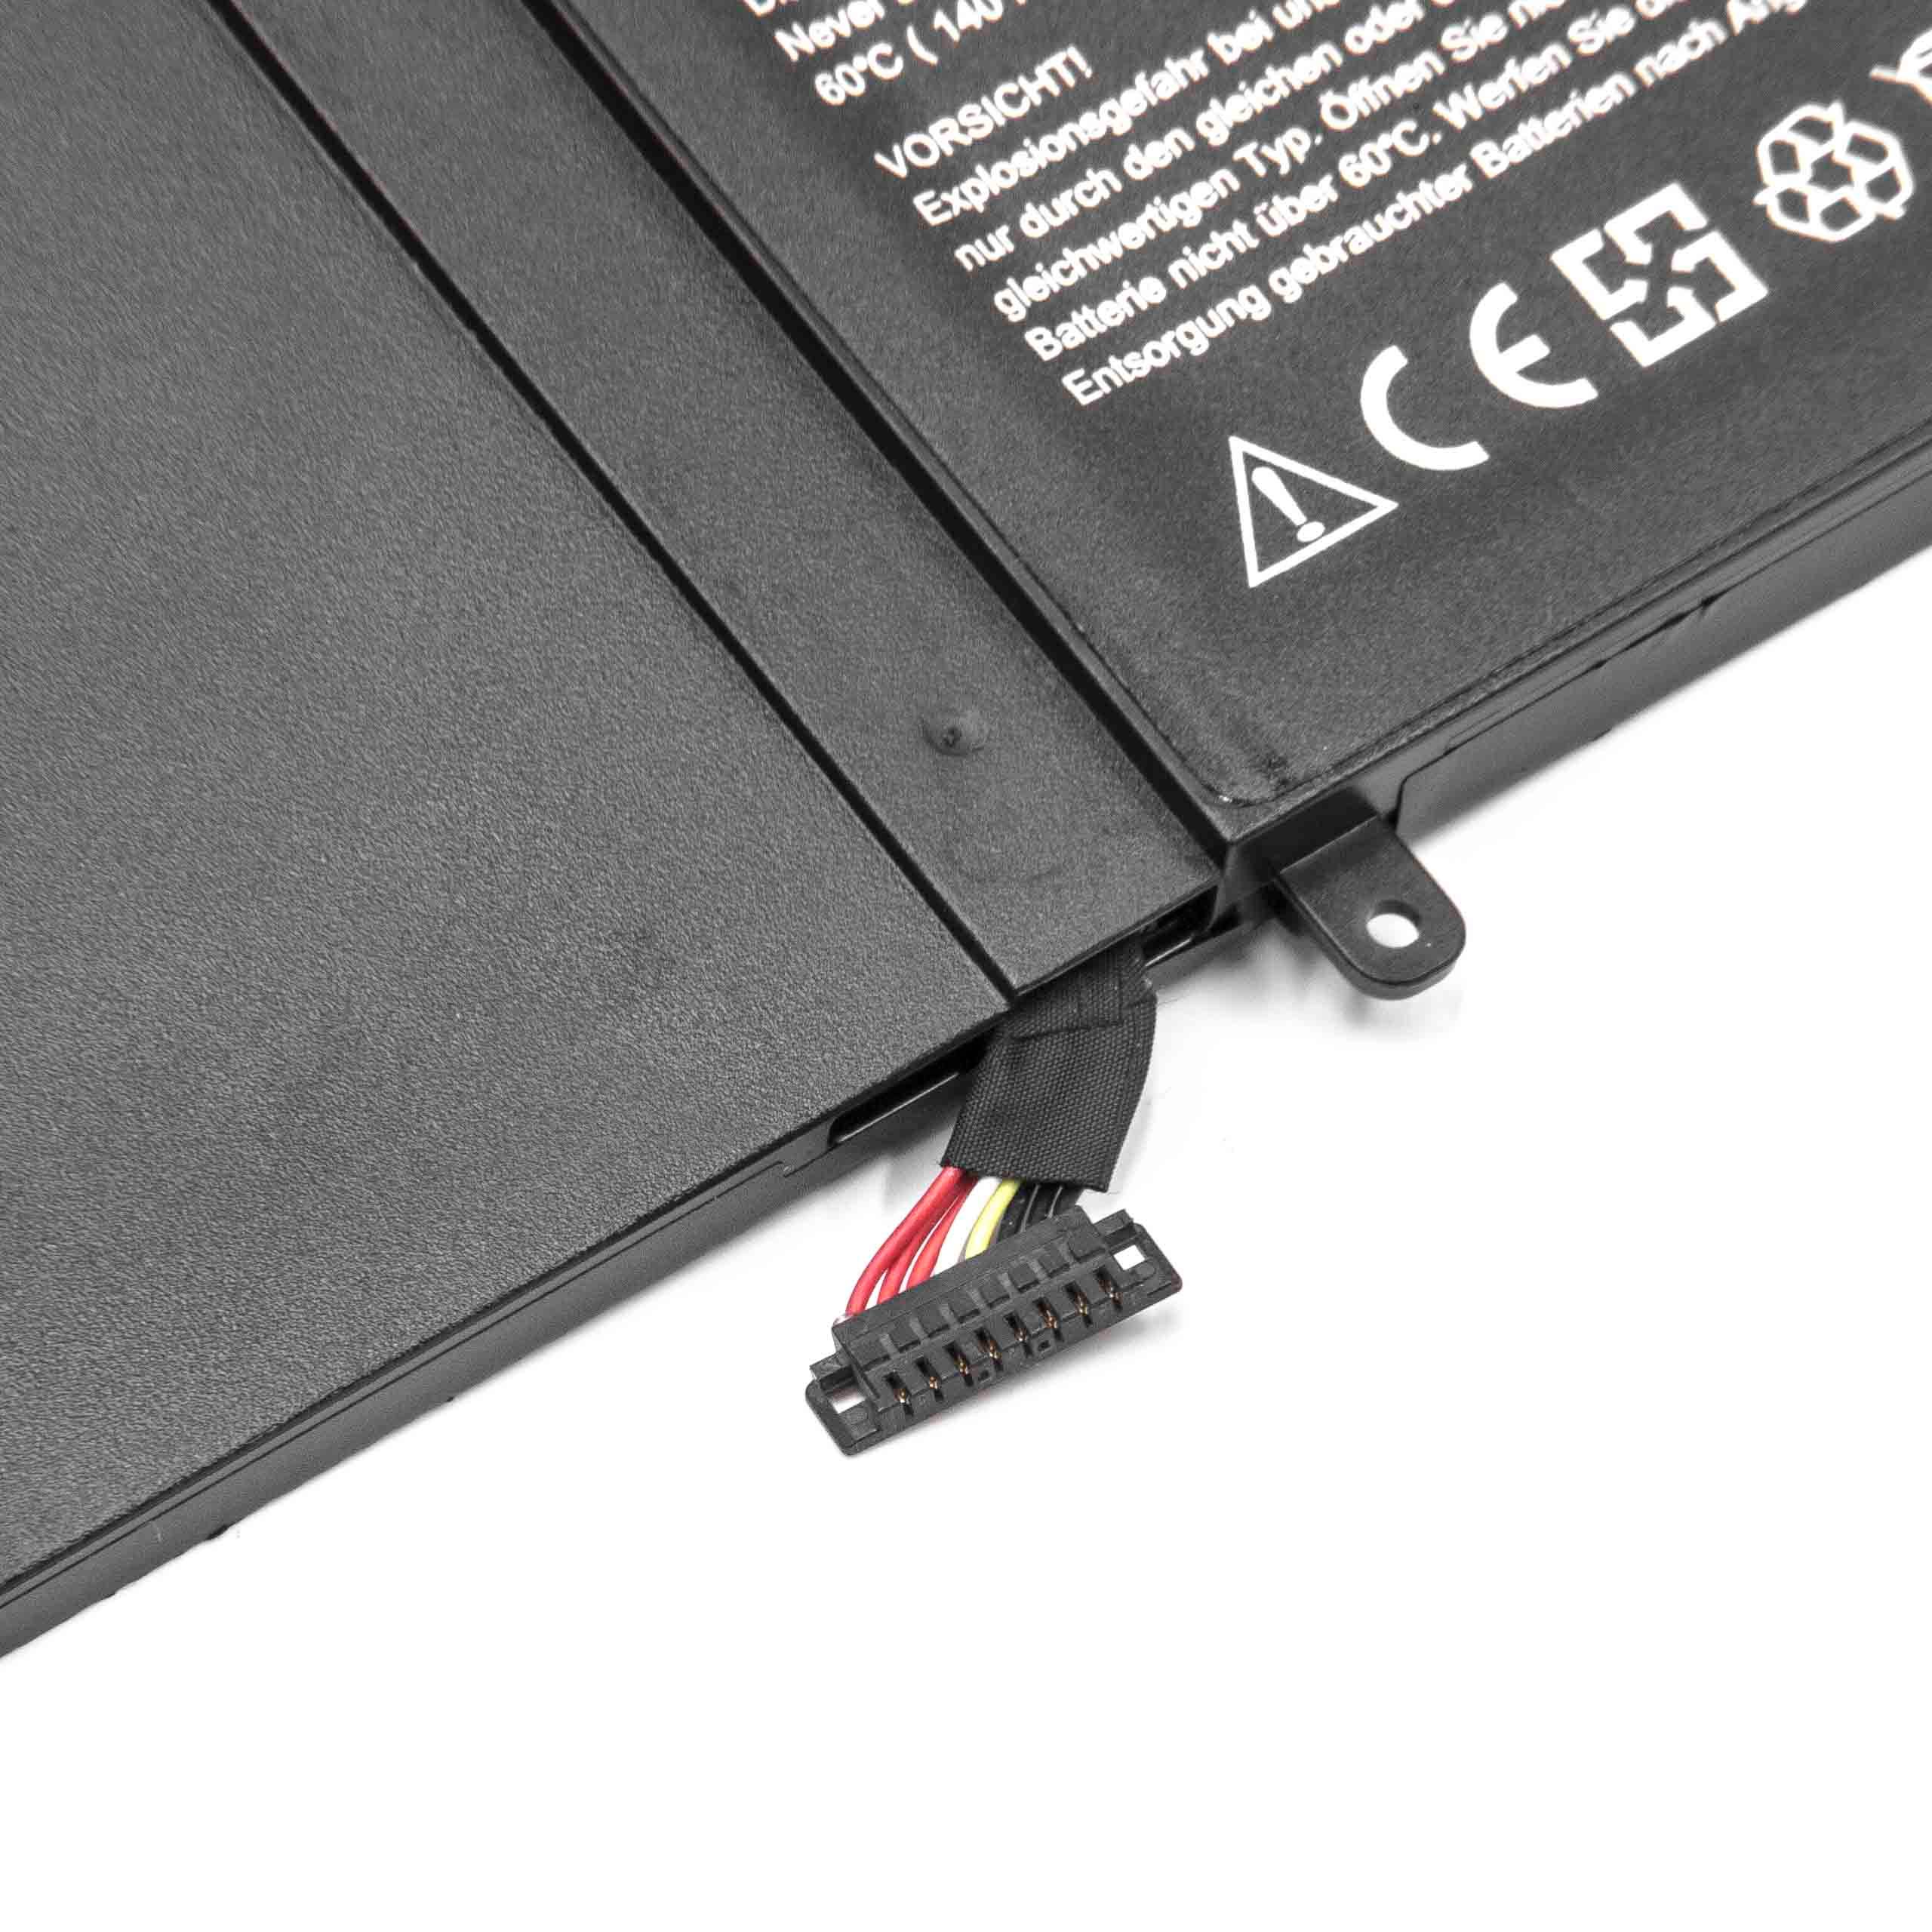 Notebook Battery Replacement for Asus C32N1415, 0B200-01250000 - 8200mAh 11.4V Li-polymer